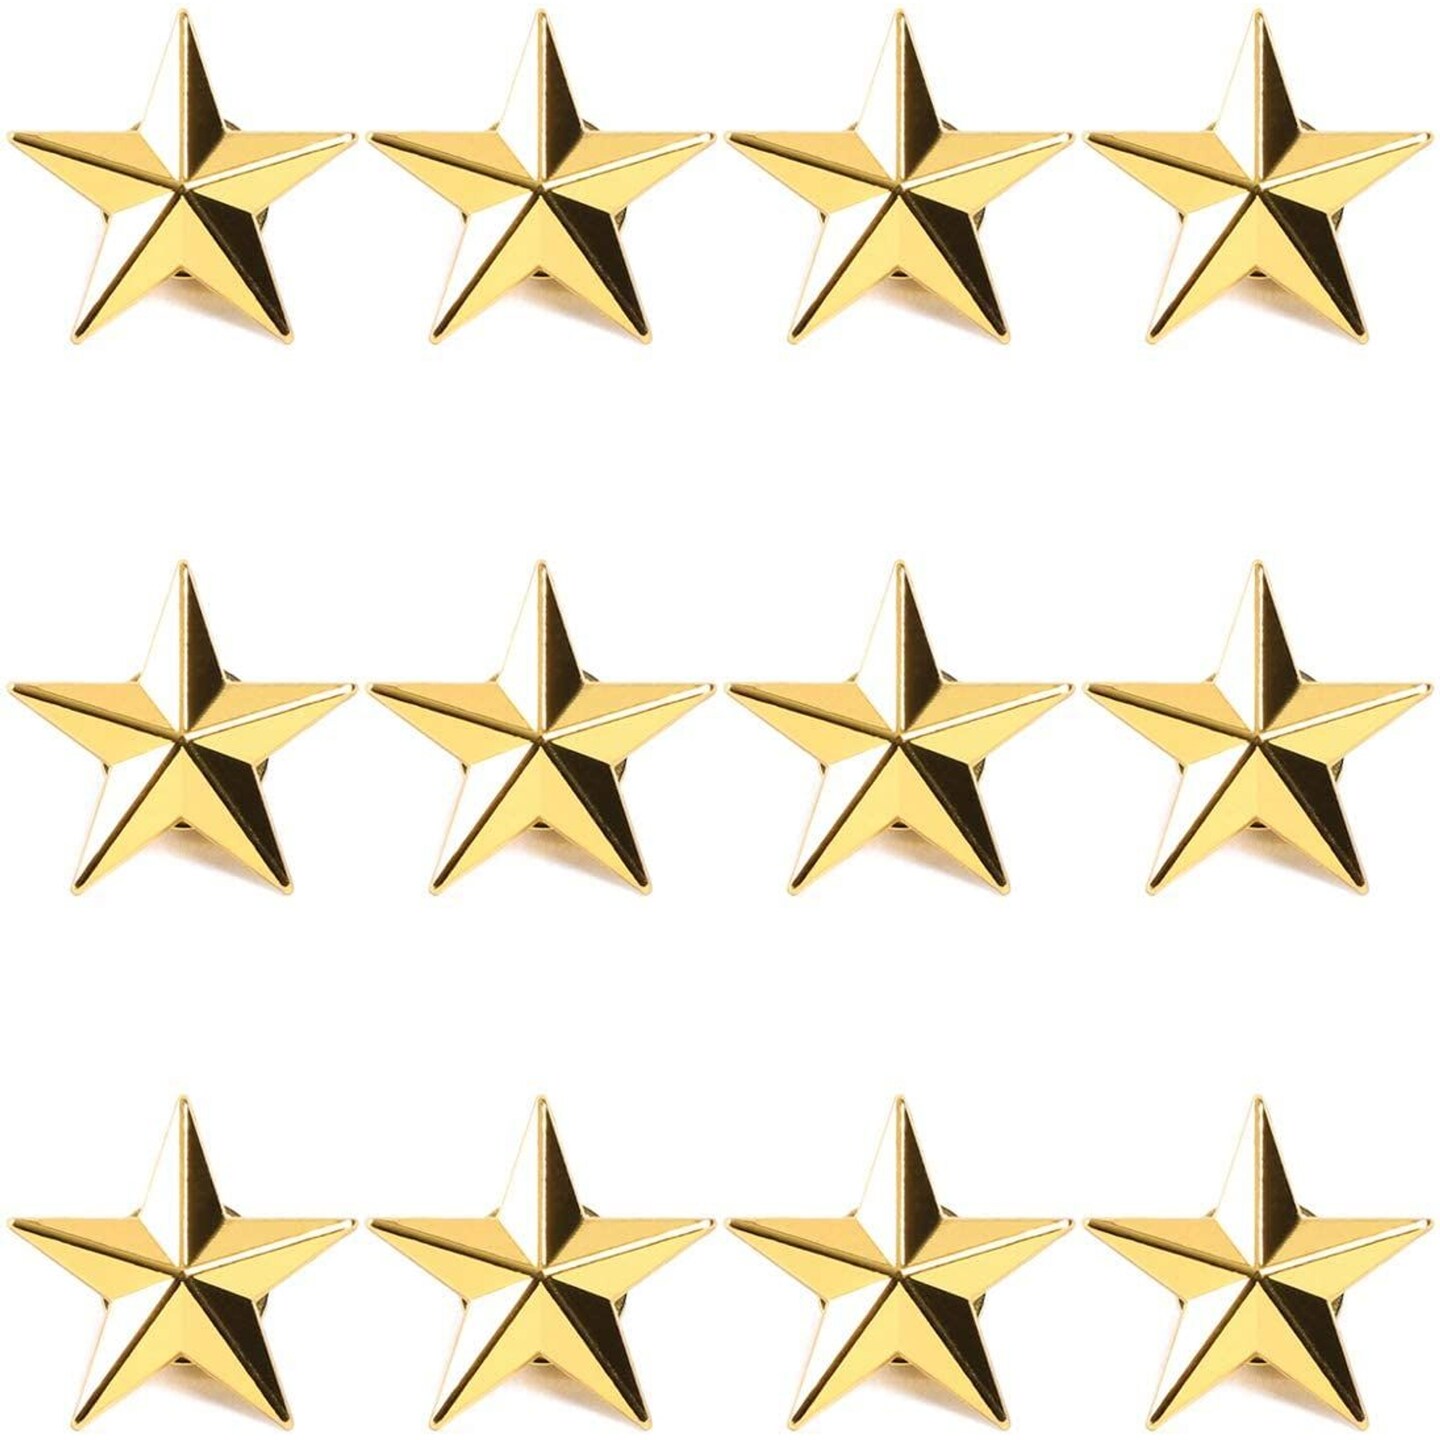 Gold Point Star Lapel Pins, Enamel Pin Set (1 in, 12 Pack)